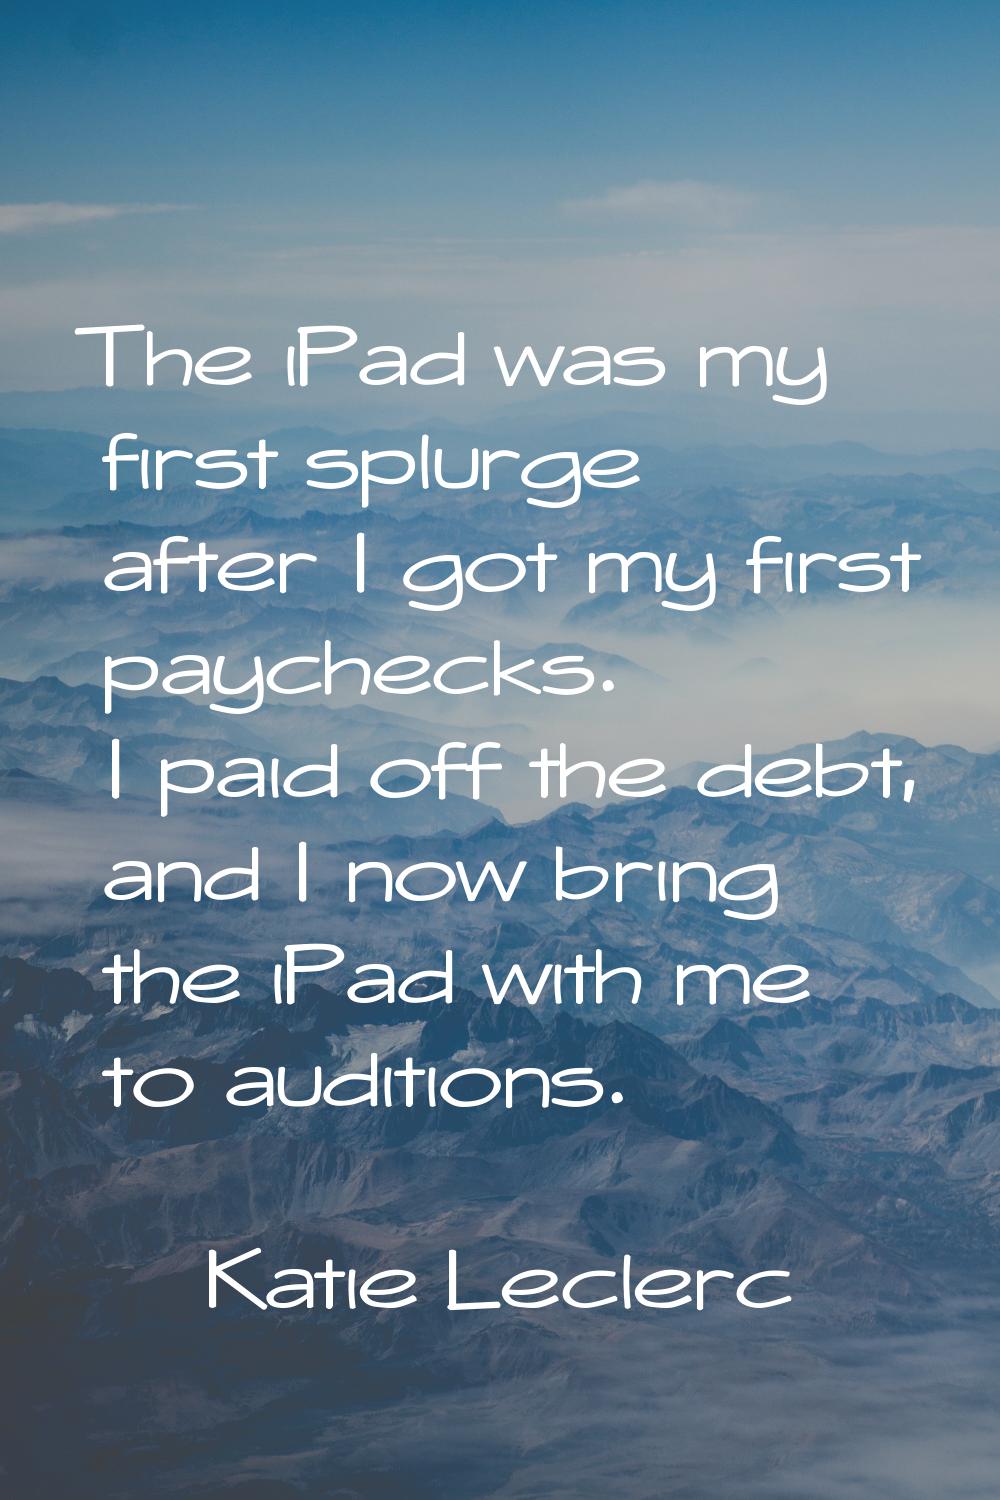 The iPad was my first splurge after I got my first paychecks. I paid off the debt, and I now bring 